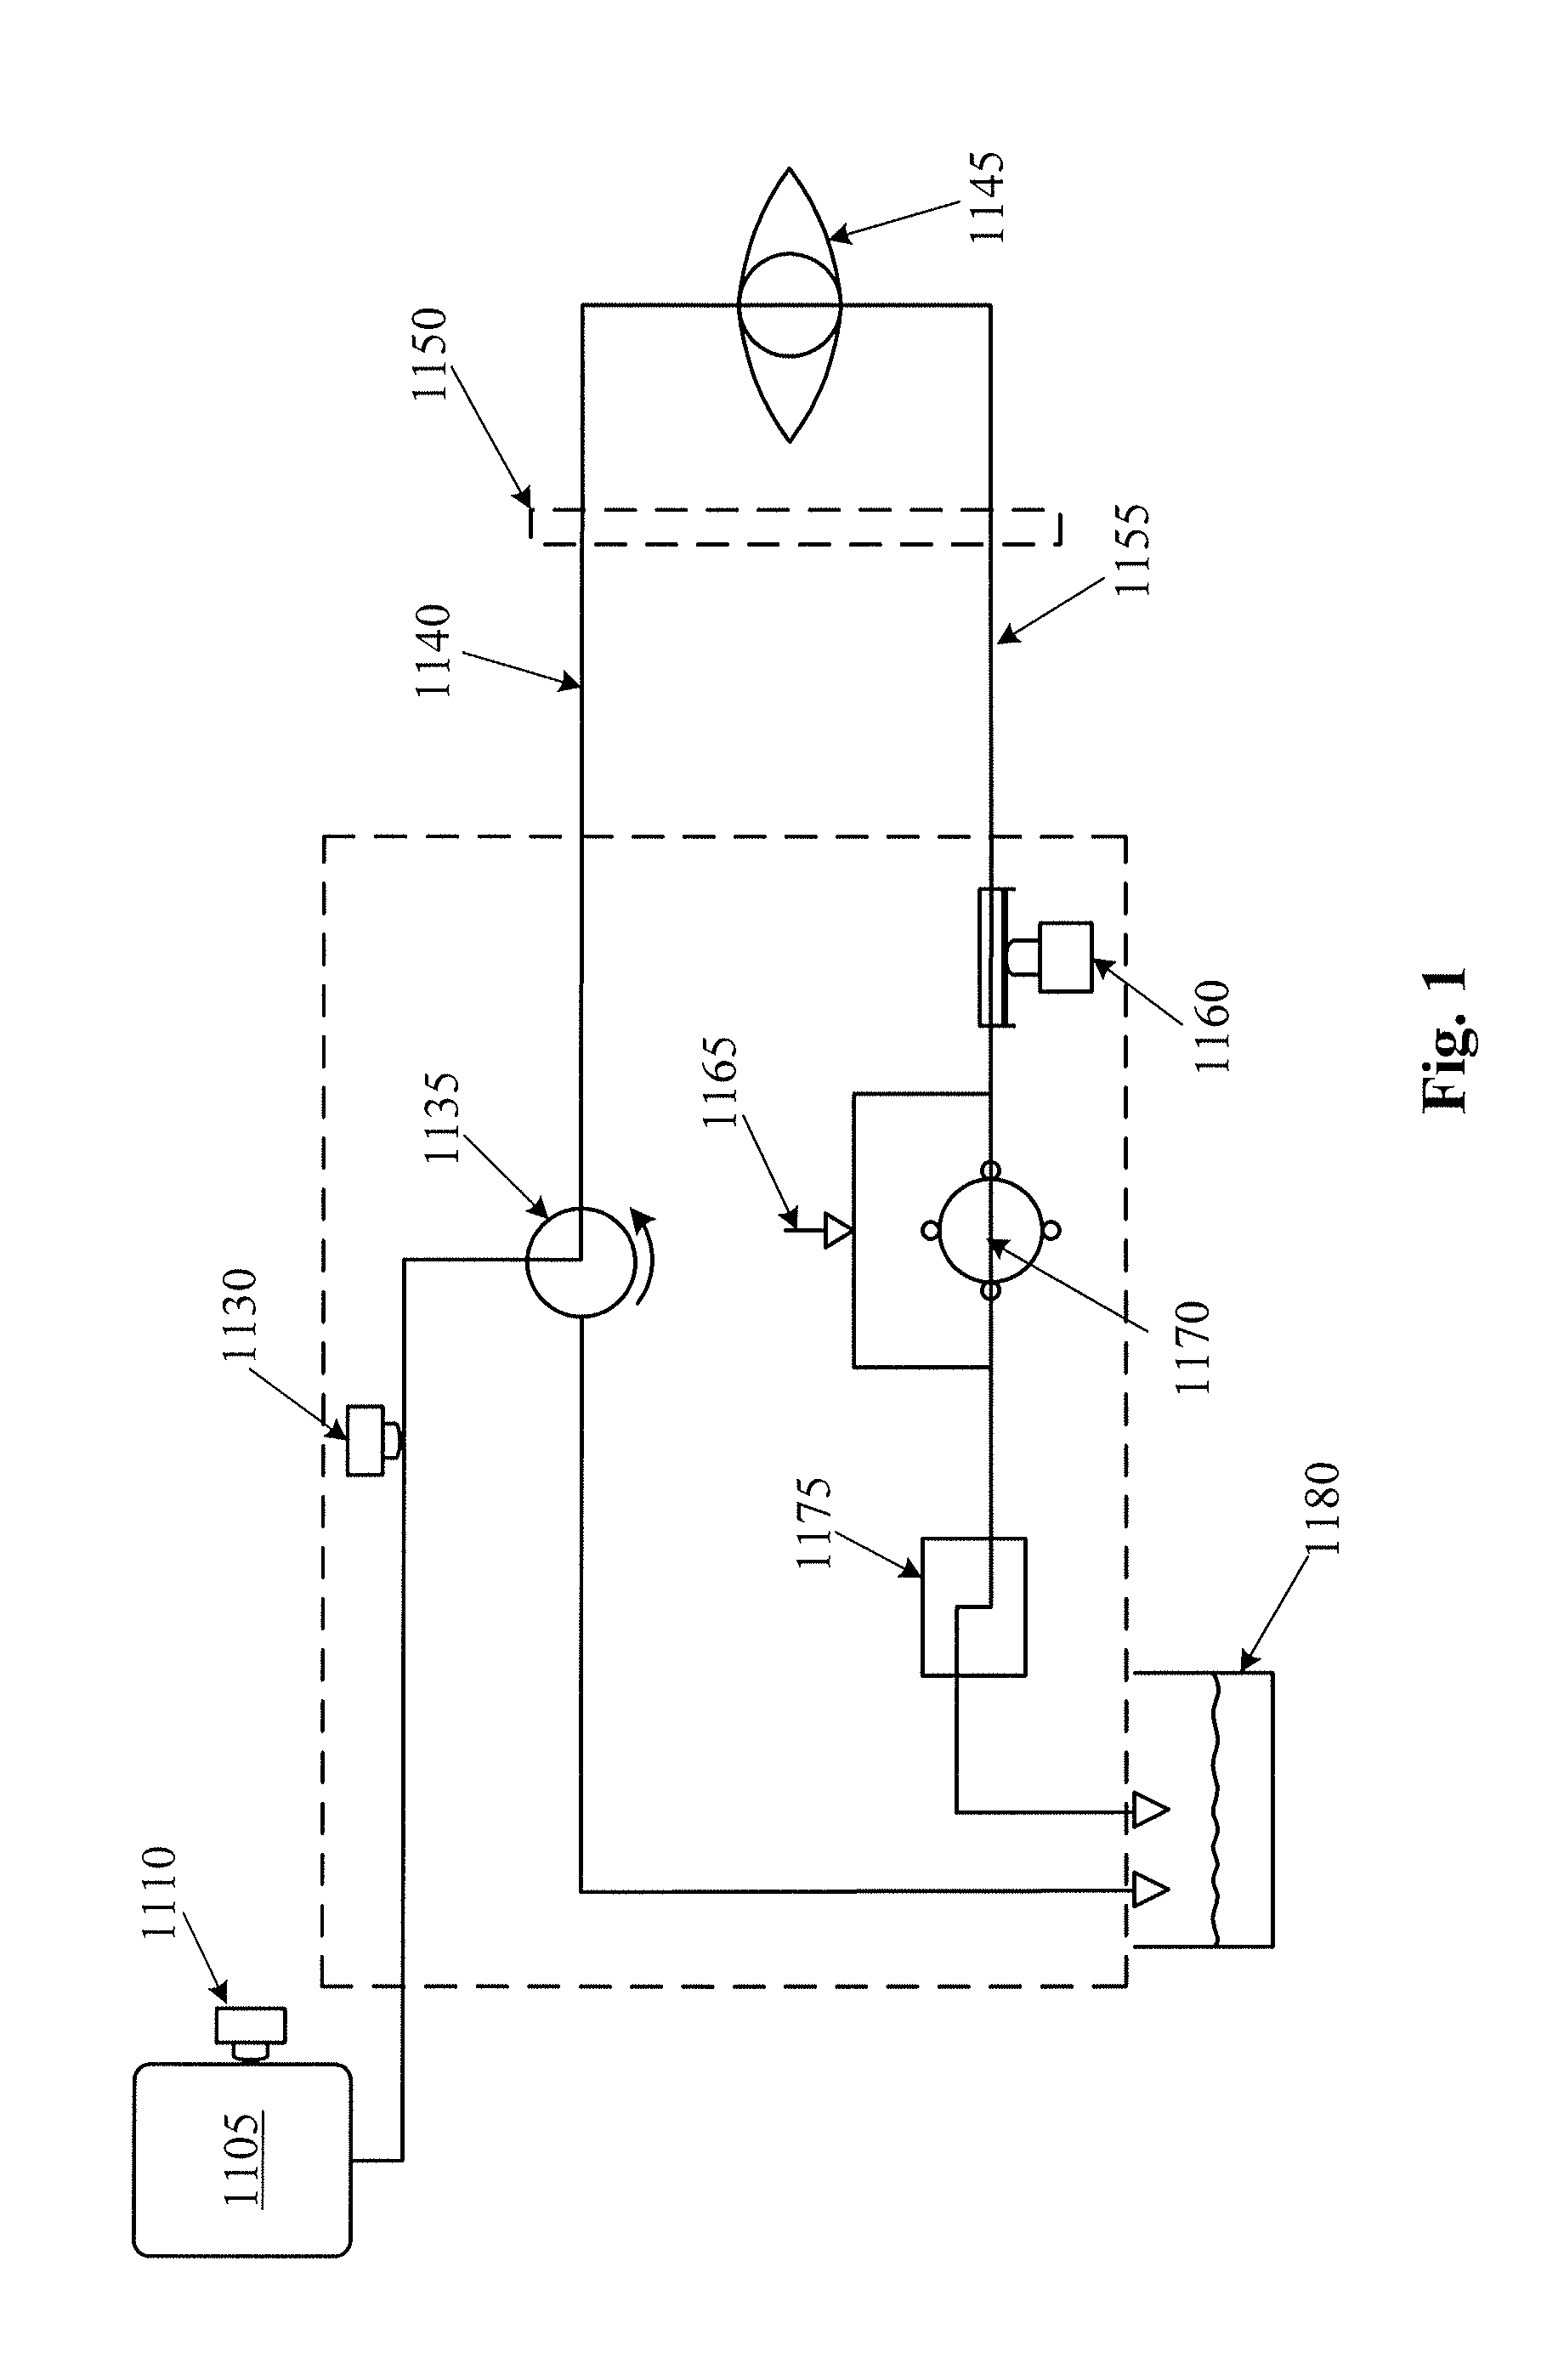 Pressure Control in Phacoemulsification System